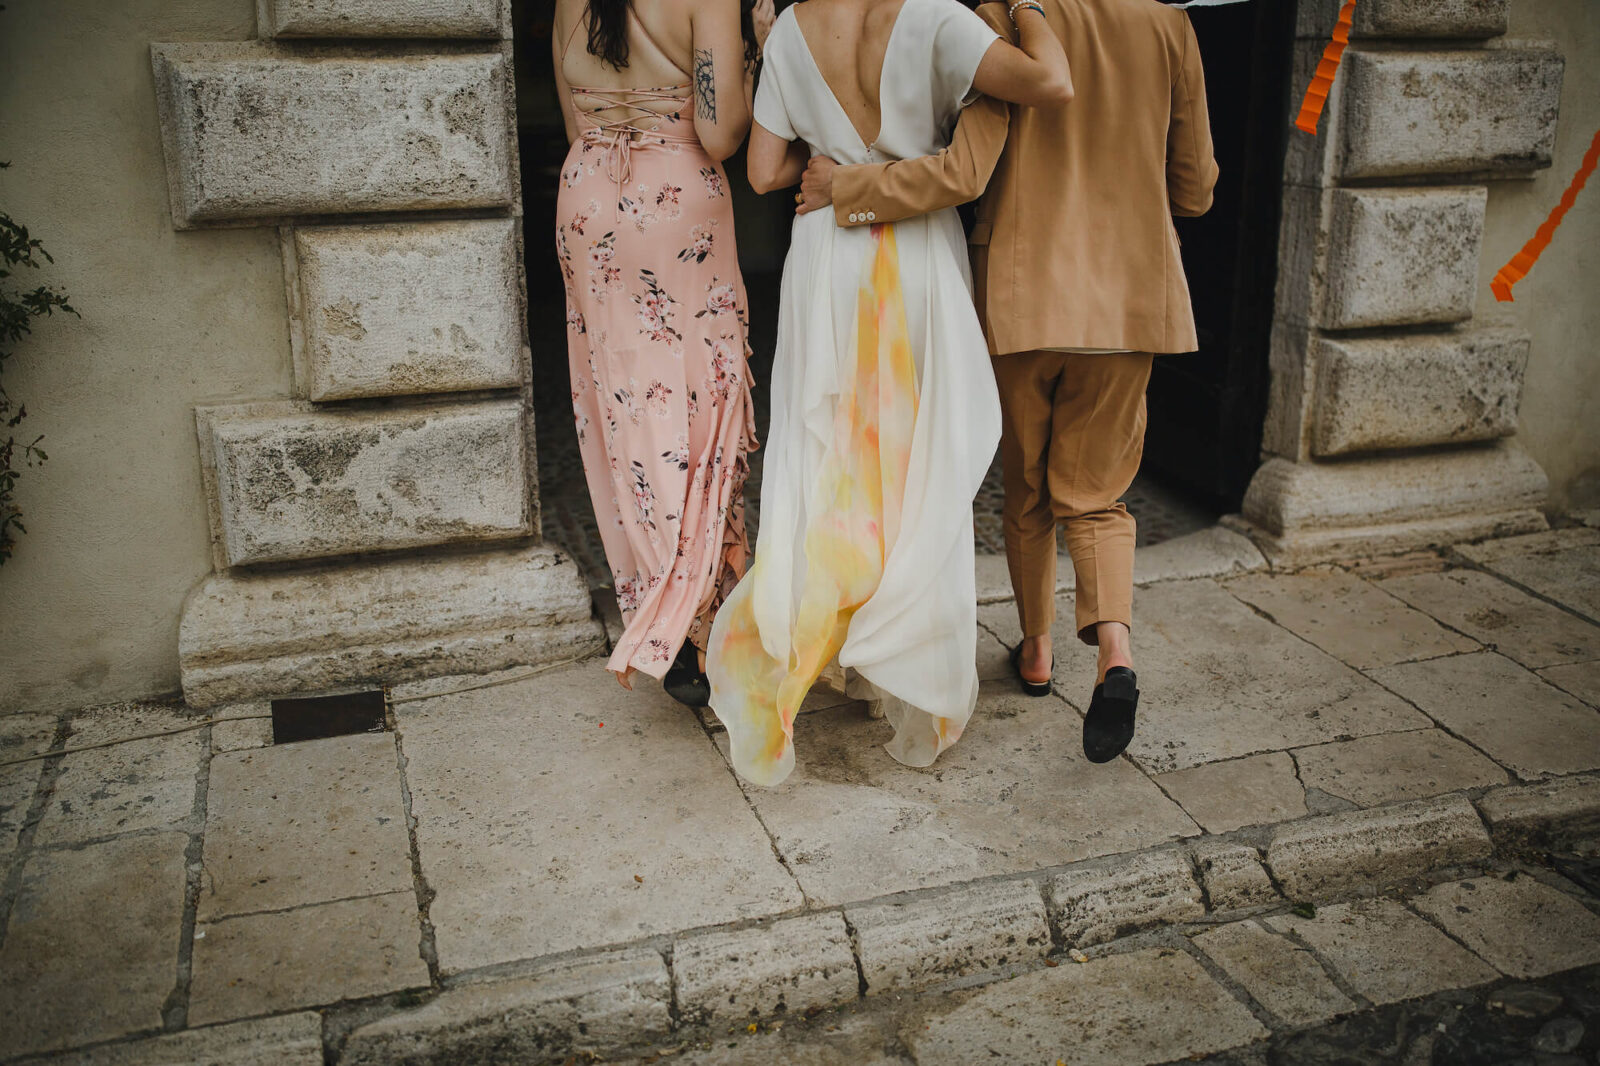 Modern painted wedding dress in Umbria